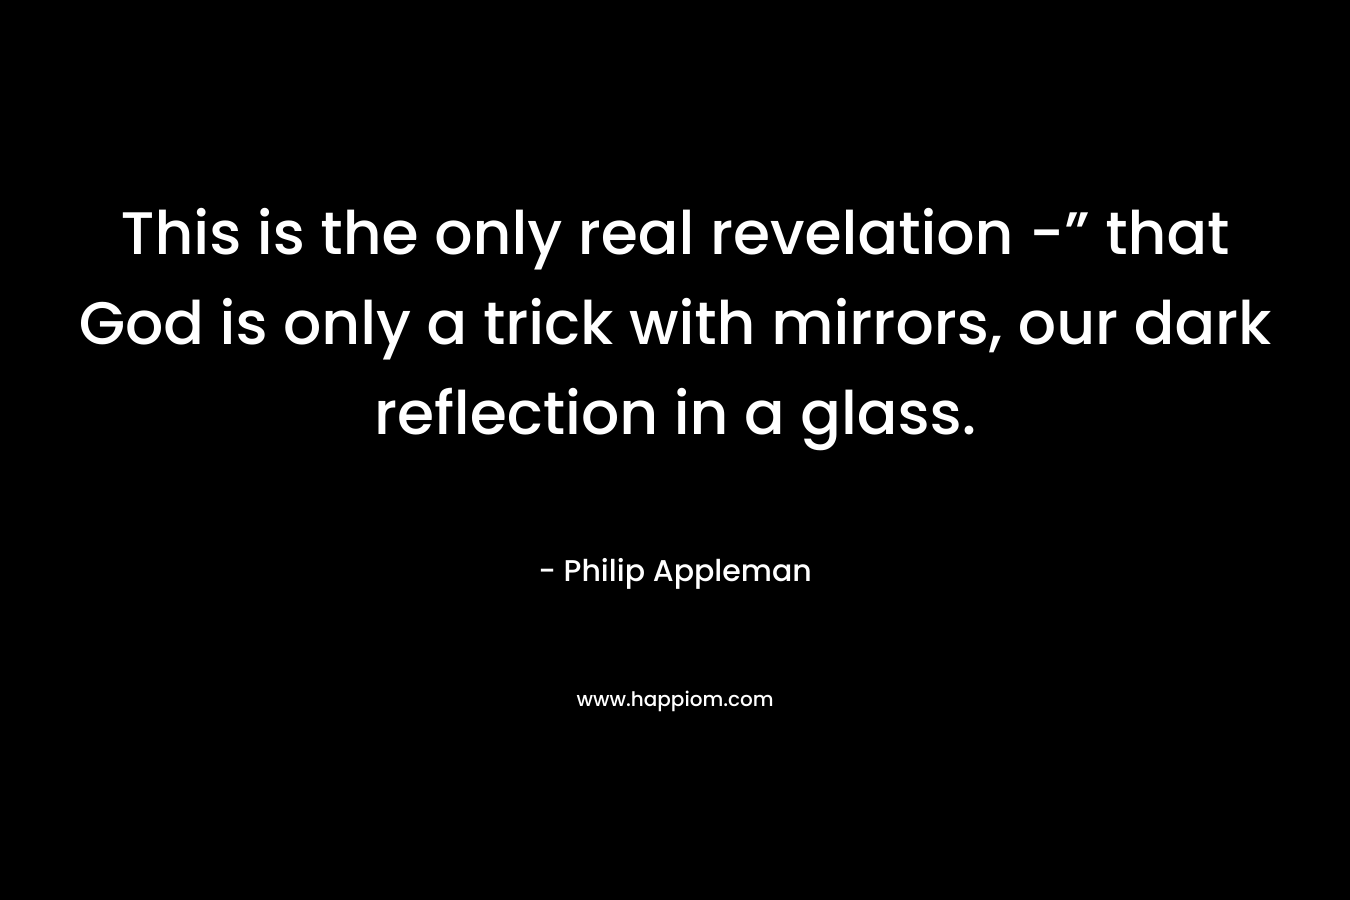 This is the only real revelation -” that God is only a trick with mirrors, our dark reflection in a glass.